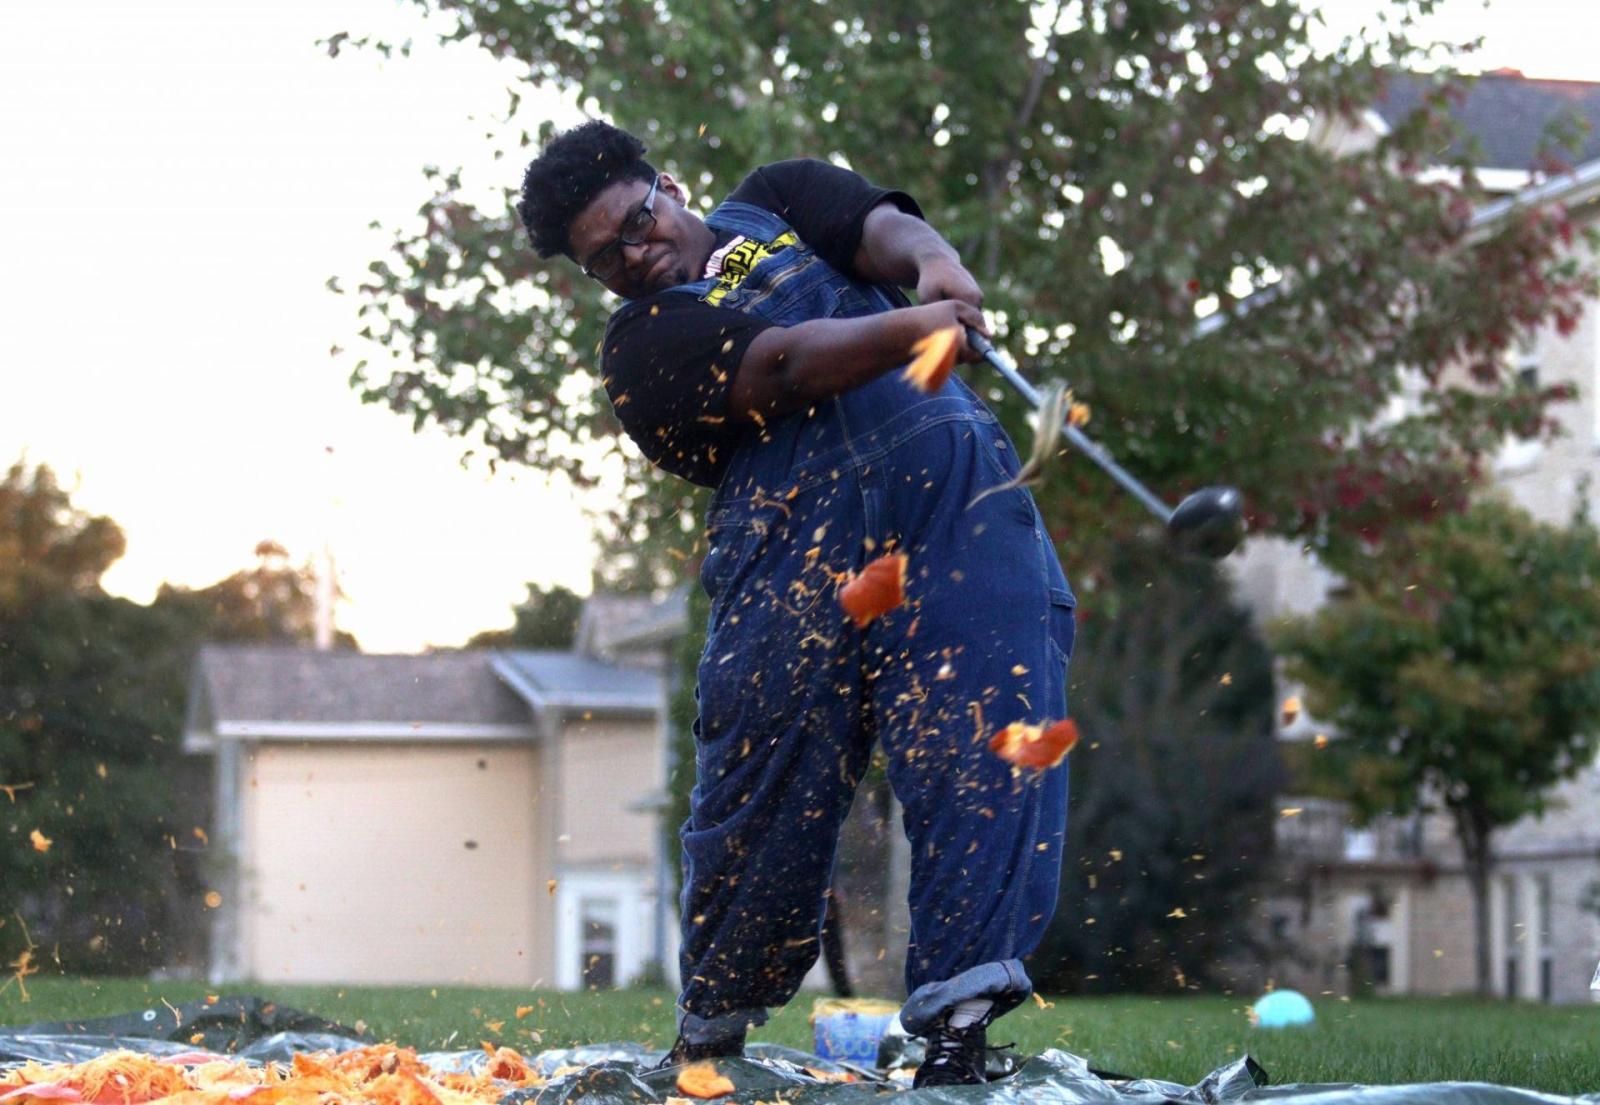 Student smashing a pumpkin with golf club during a Beta Theta Phi charity event.